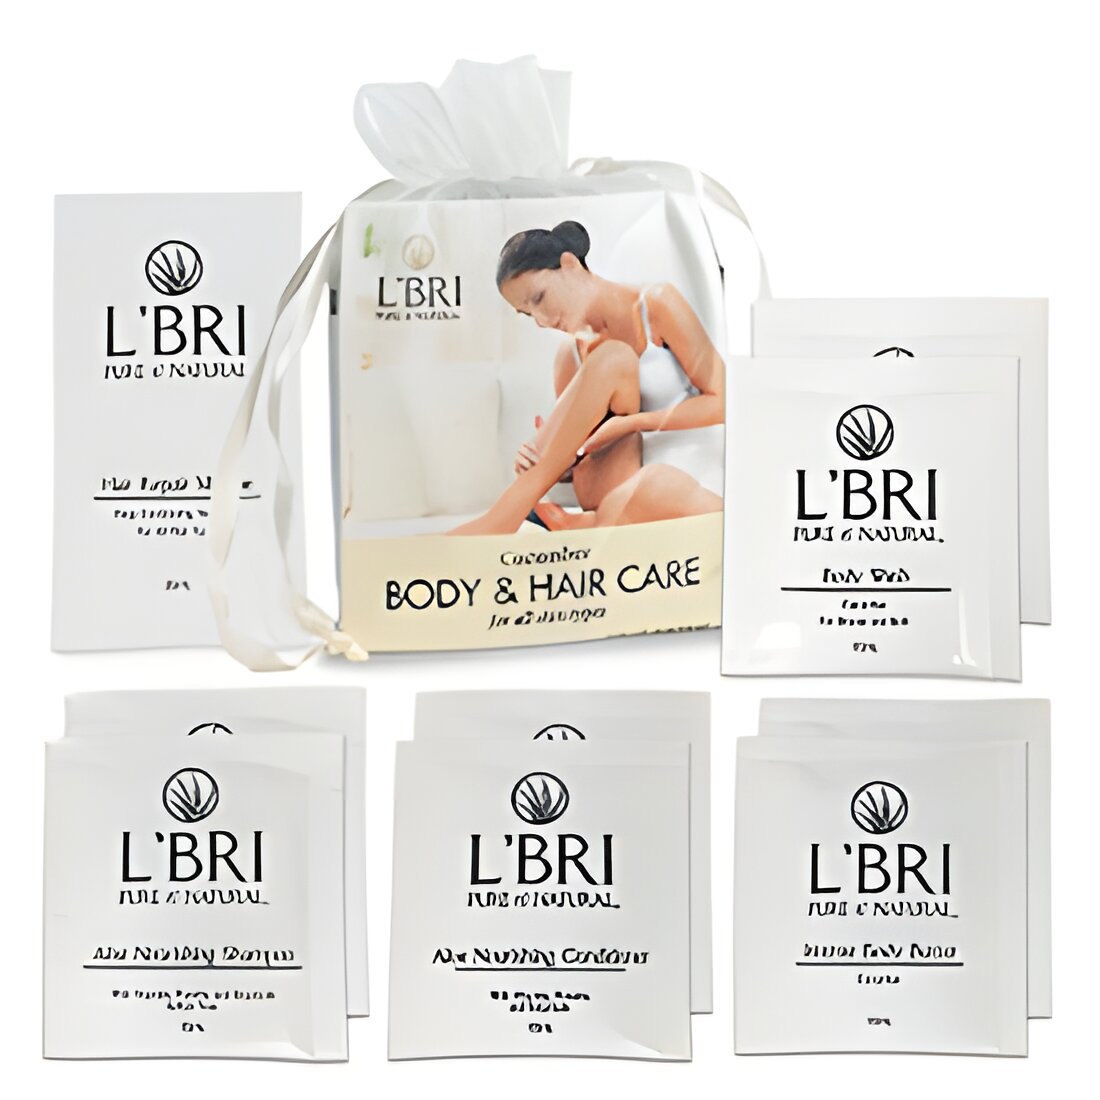 Free Body & Hair Care Travel Set From L'BRI